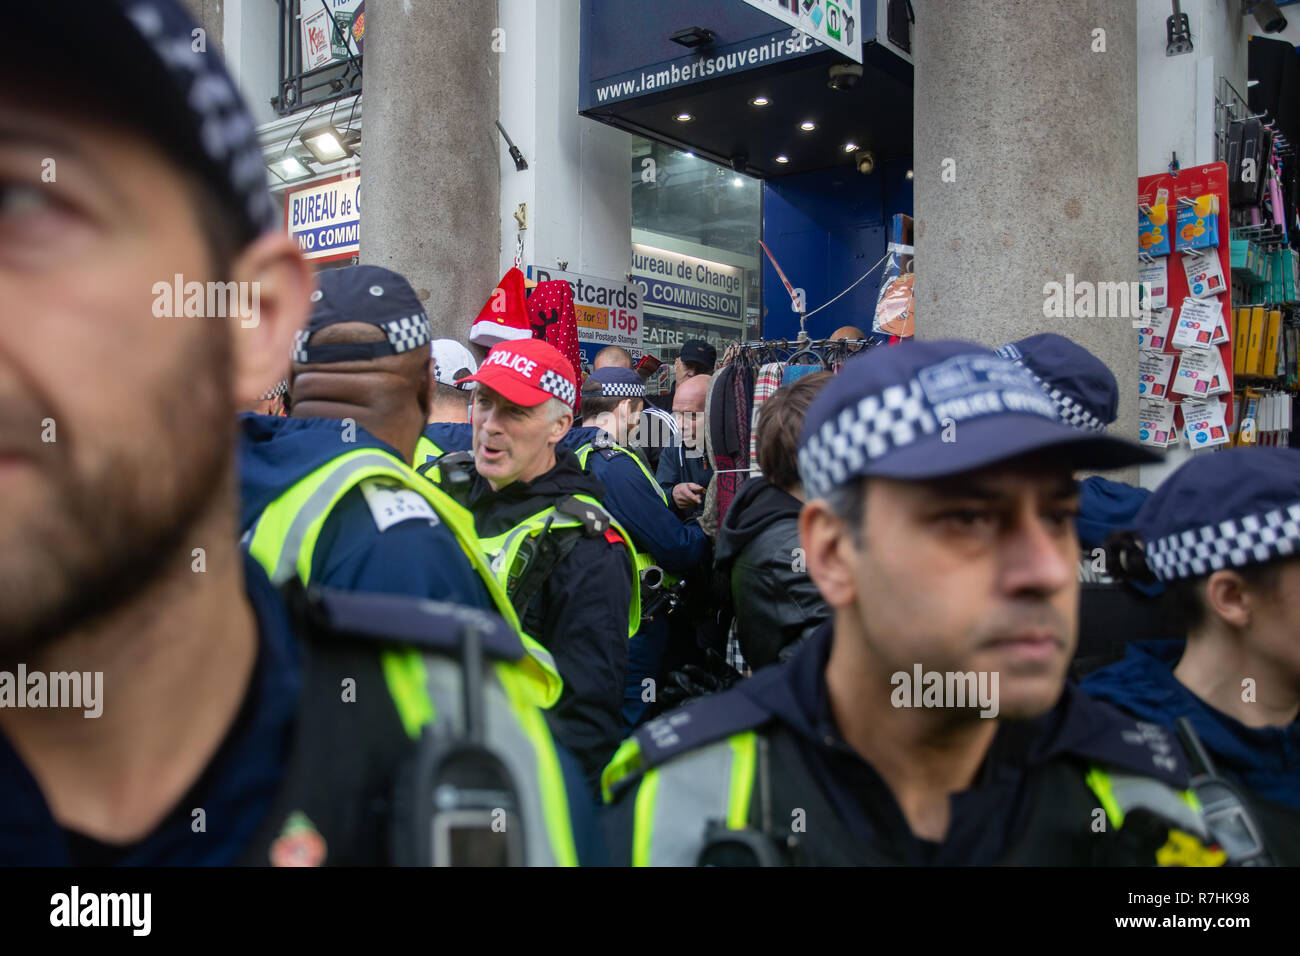 Police shield UKIP demonstrators inside a souvenir shop following a scuffle with Anti-Facist demonstrators.   3,000 Pro-Brexit demonstrators and 15,000 Anti-Facist counter demonstrators took to the streets of London to voice their stance on the deal ahead of the key Brexit vote in parliament this Tuesday. Stock Photo